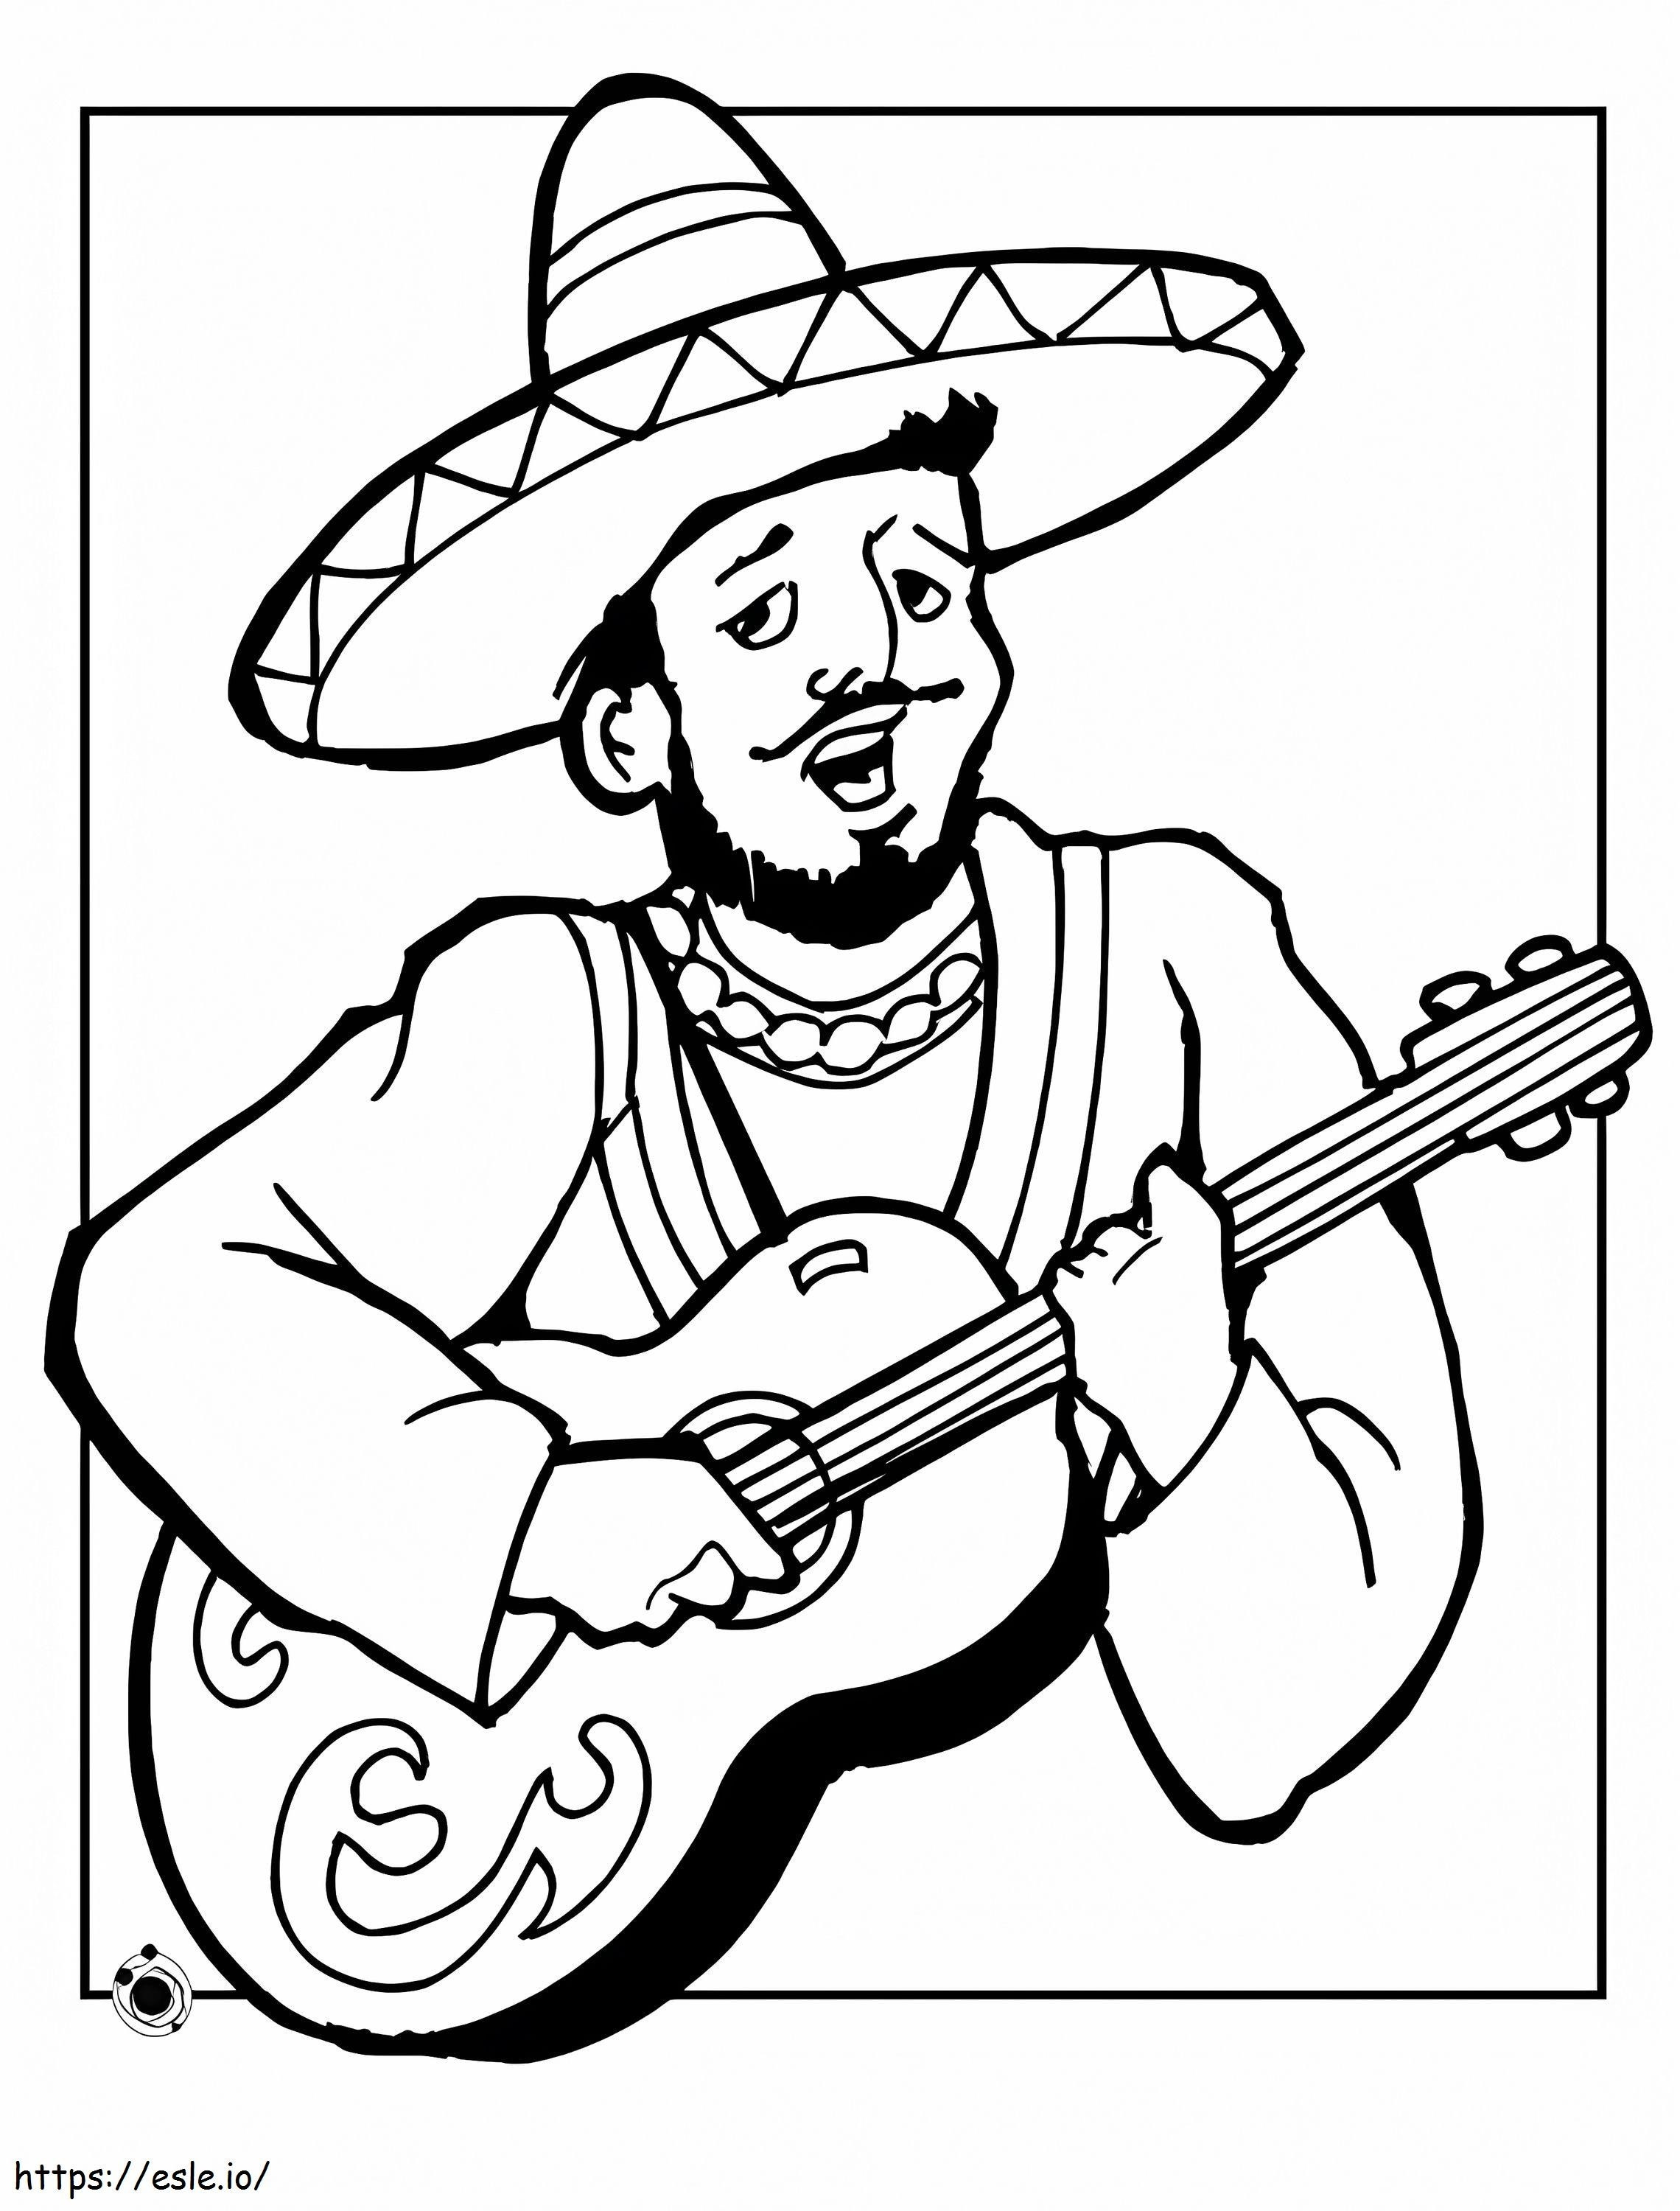 Mexican Charro Day coloring page